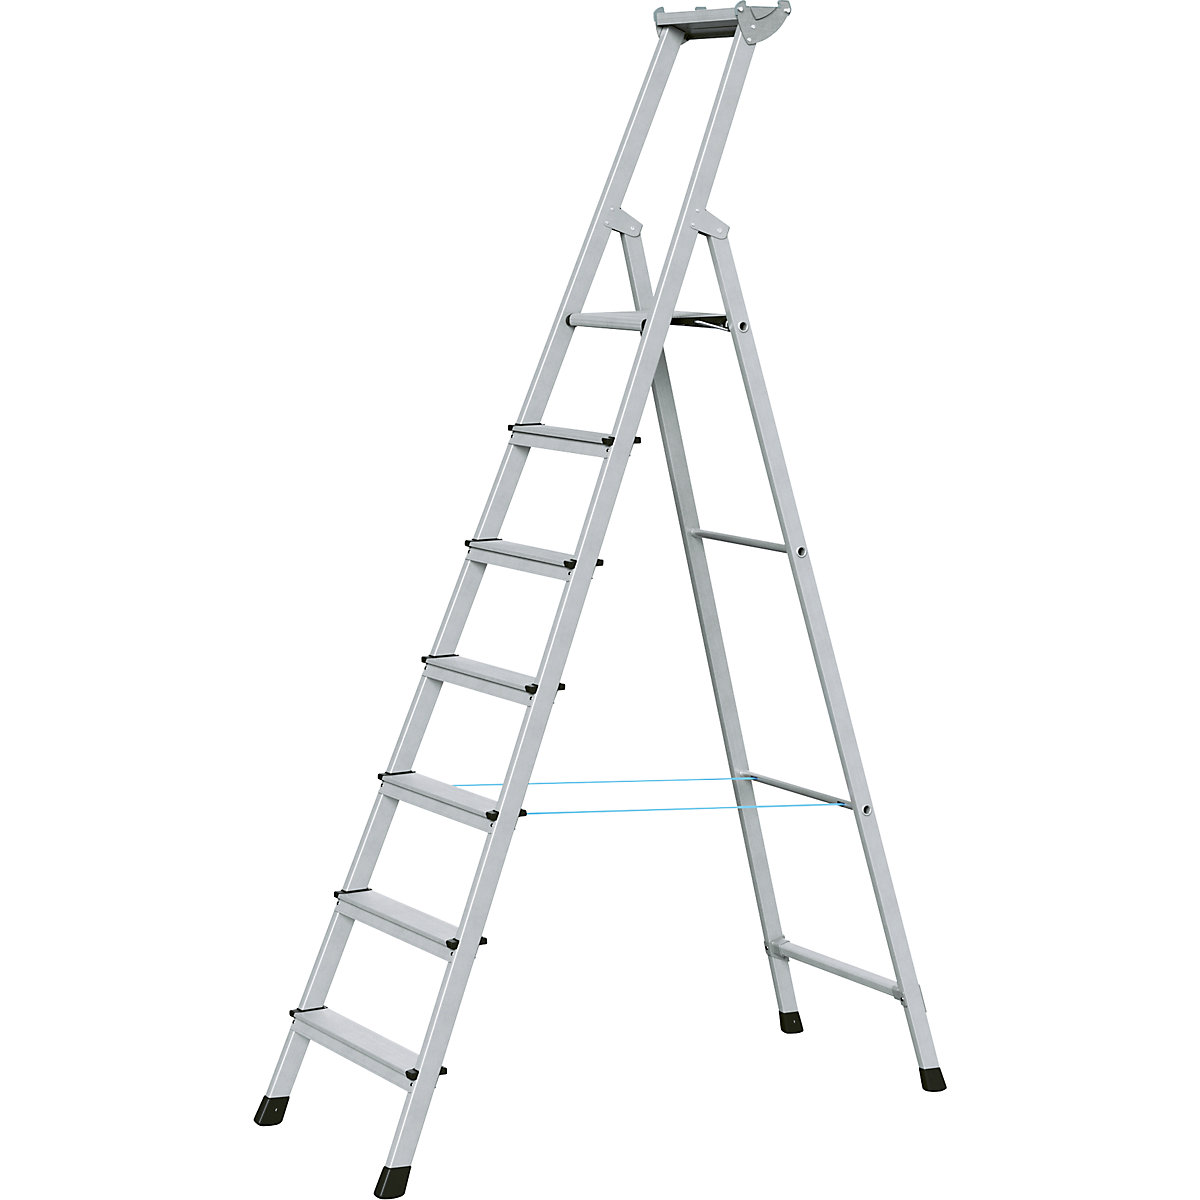 Professional step ladder, single sided access – ZARGES, anodised aluminium, with tool tray, for workshop and industrial use, 7 steps inclusive platforms-4